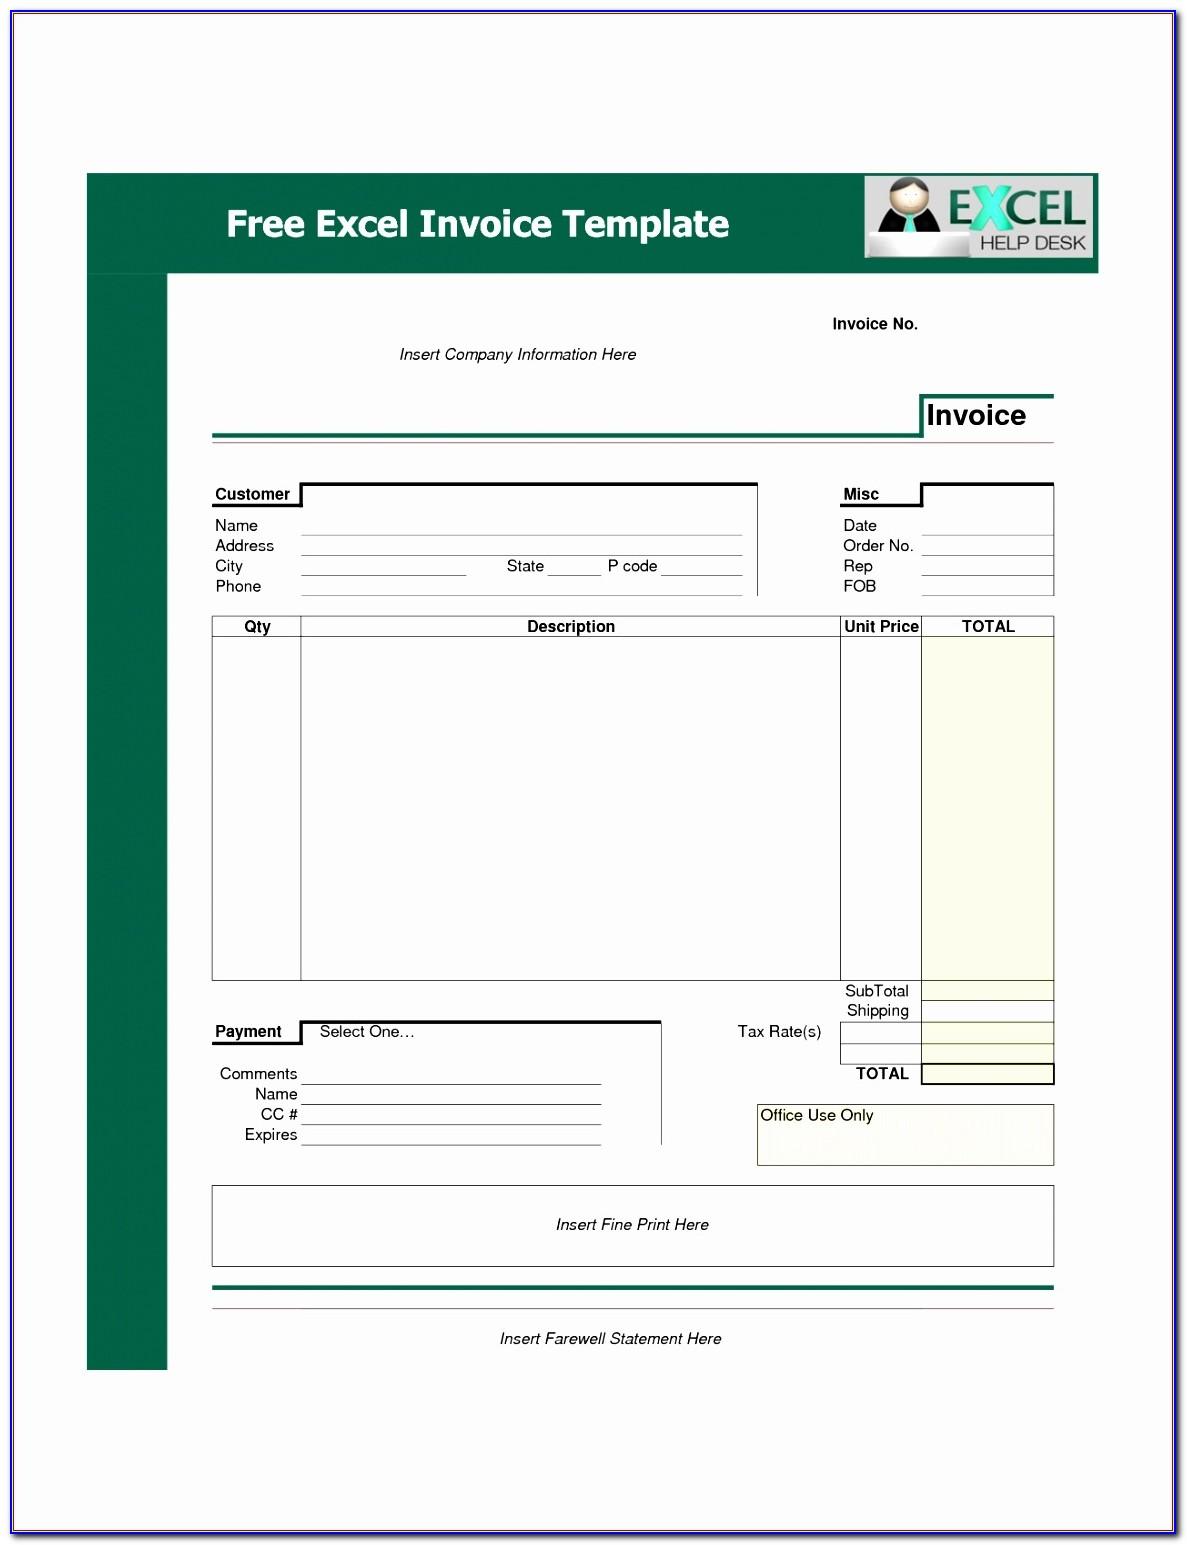 Free Excel Database Template